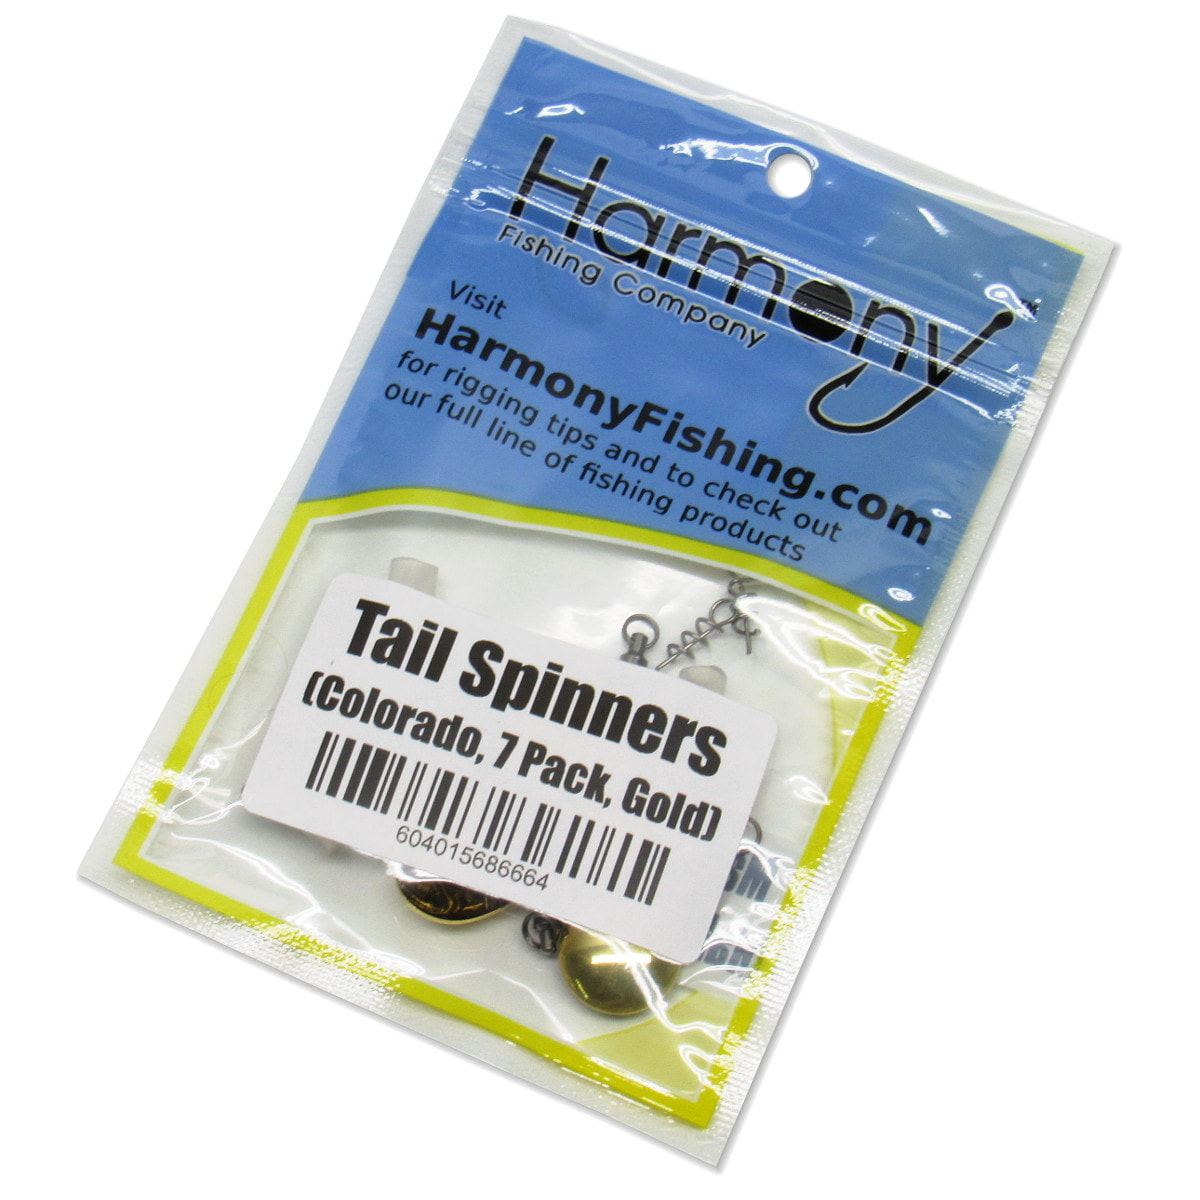 Colorado Blade Tail Spinners - Hitchhiker Spinners for Senkos and Soft  Plastics